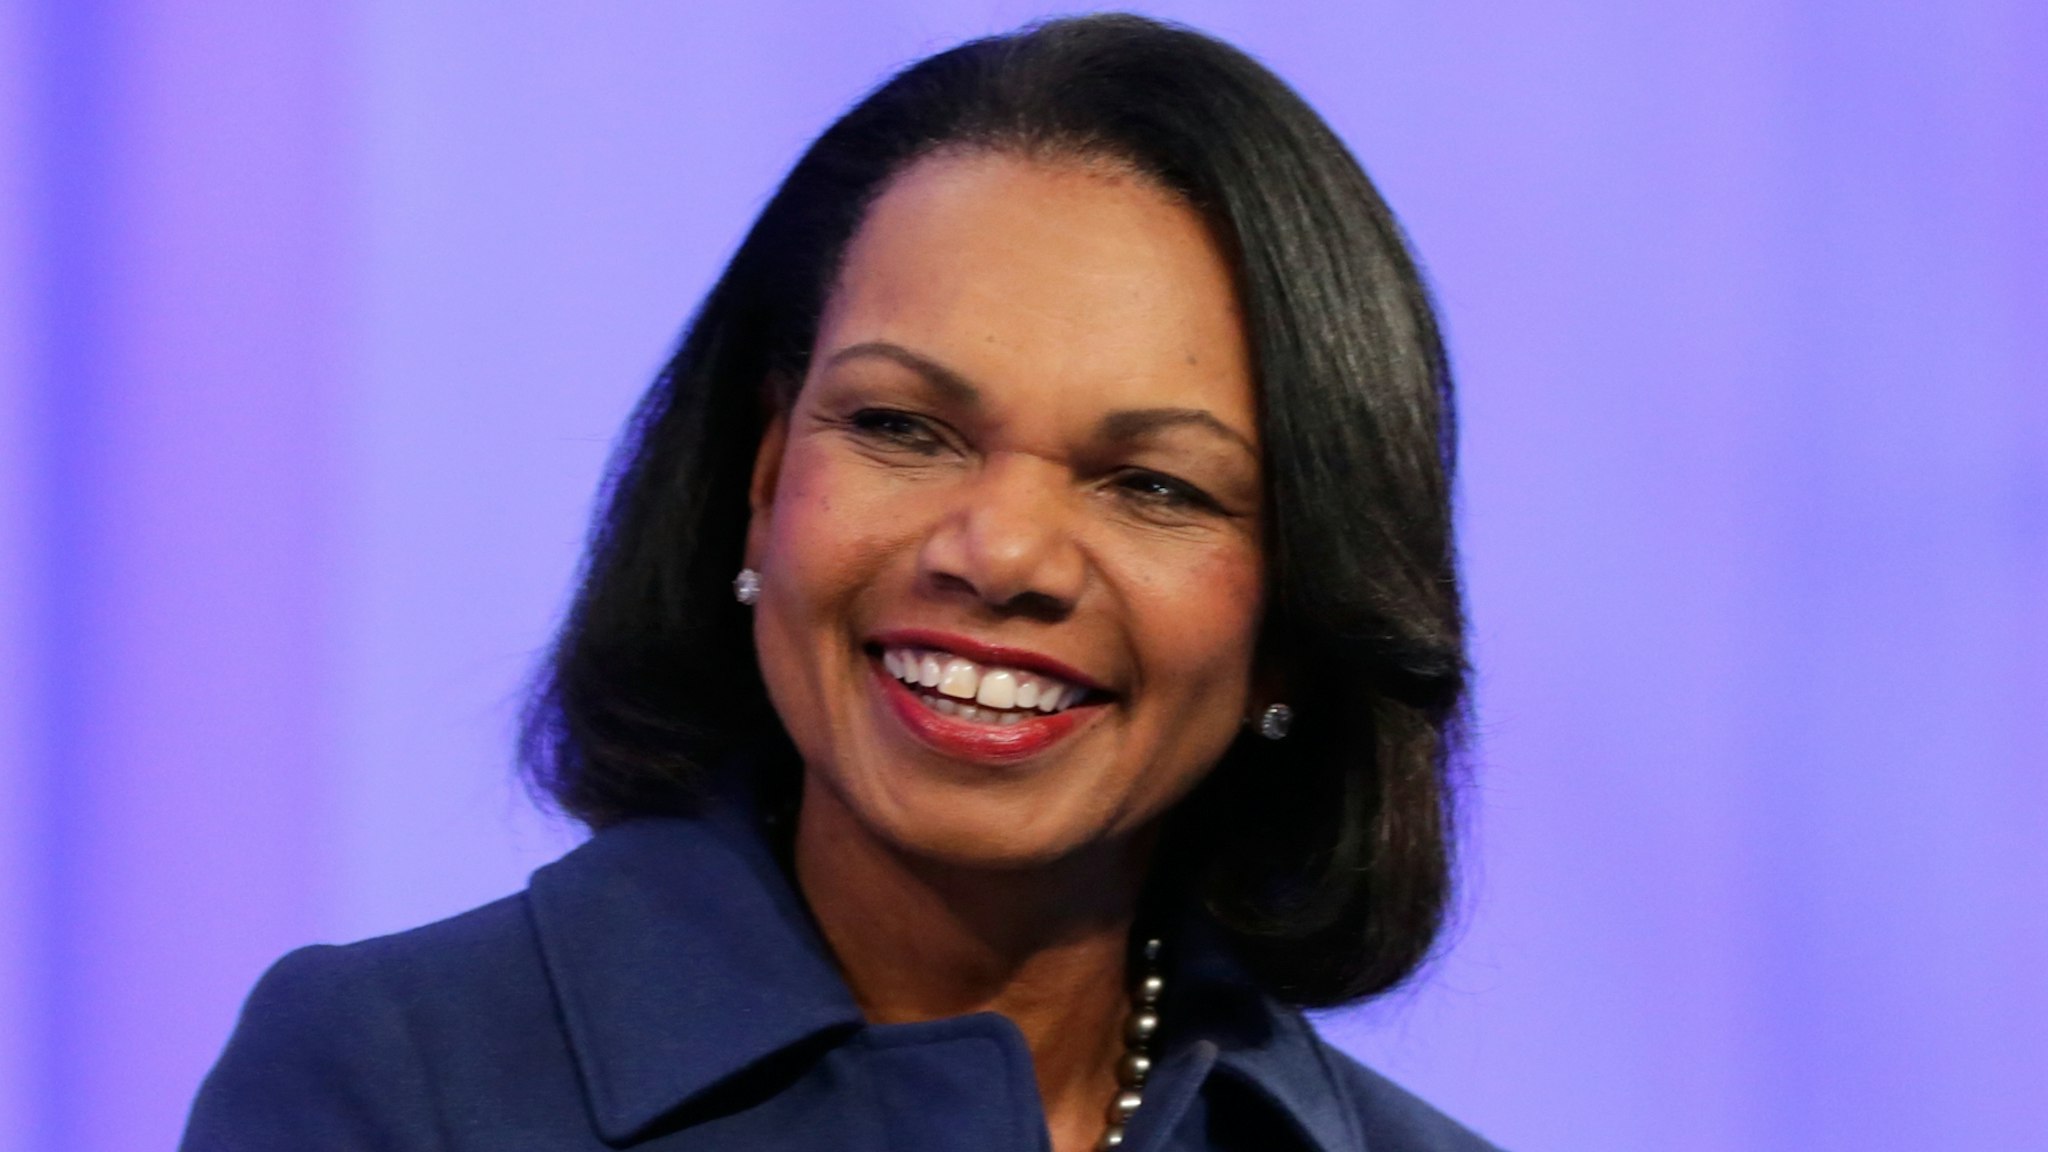 Former United States Secretary of State Condoleezza Rice speaks at the Watermark Conference for Women at San Jose Convention Center on February 1, 2017 in San Jose, California.